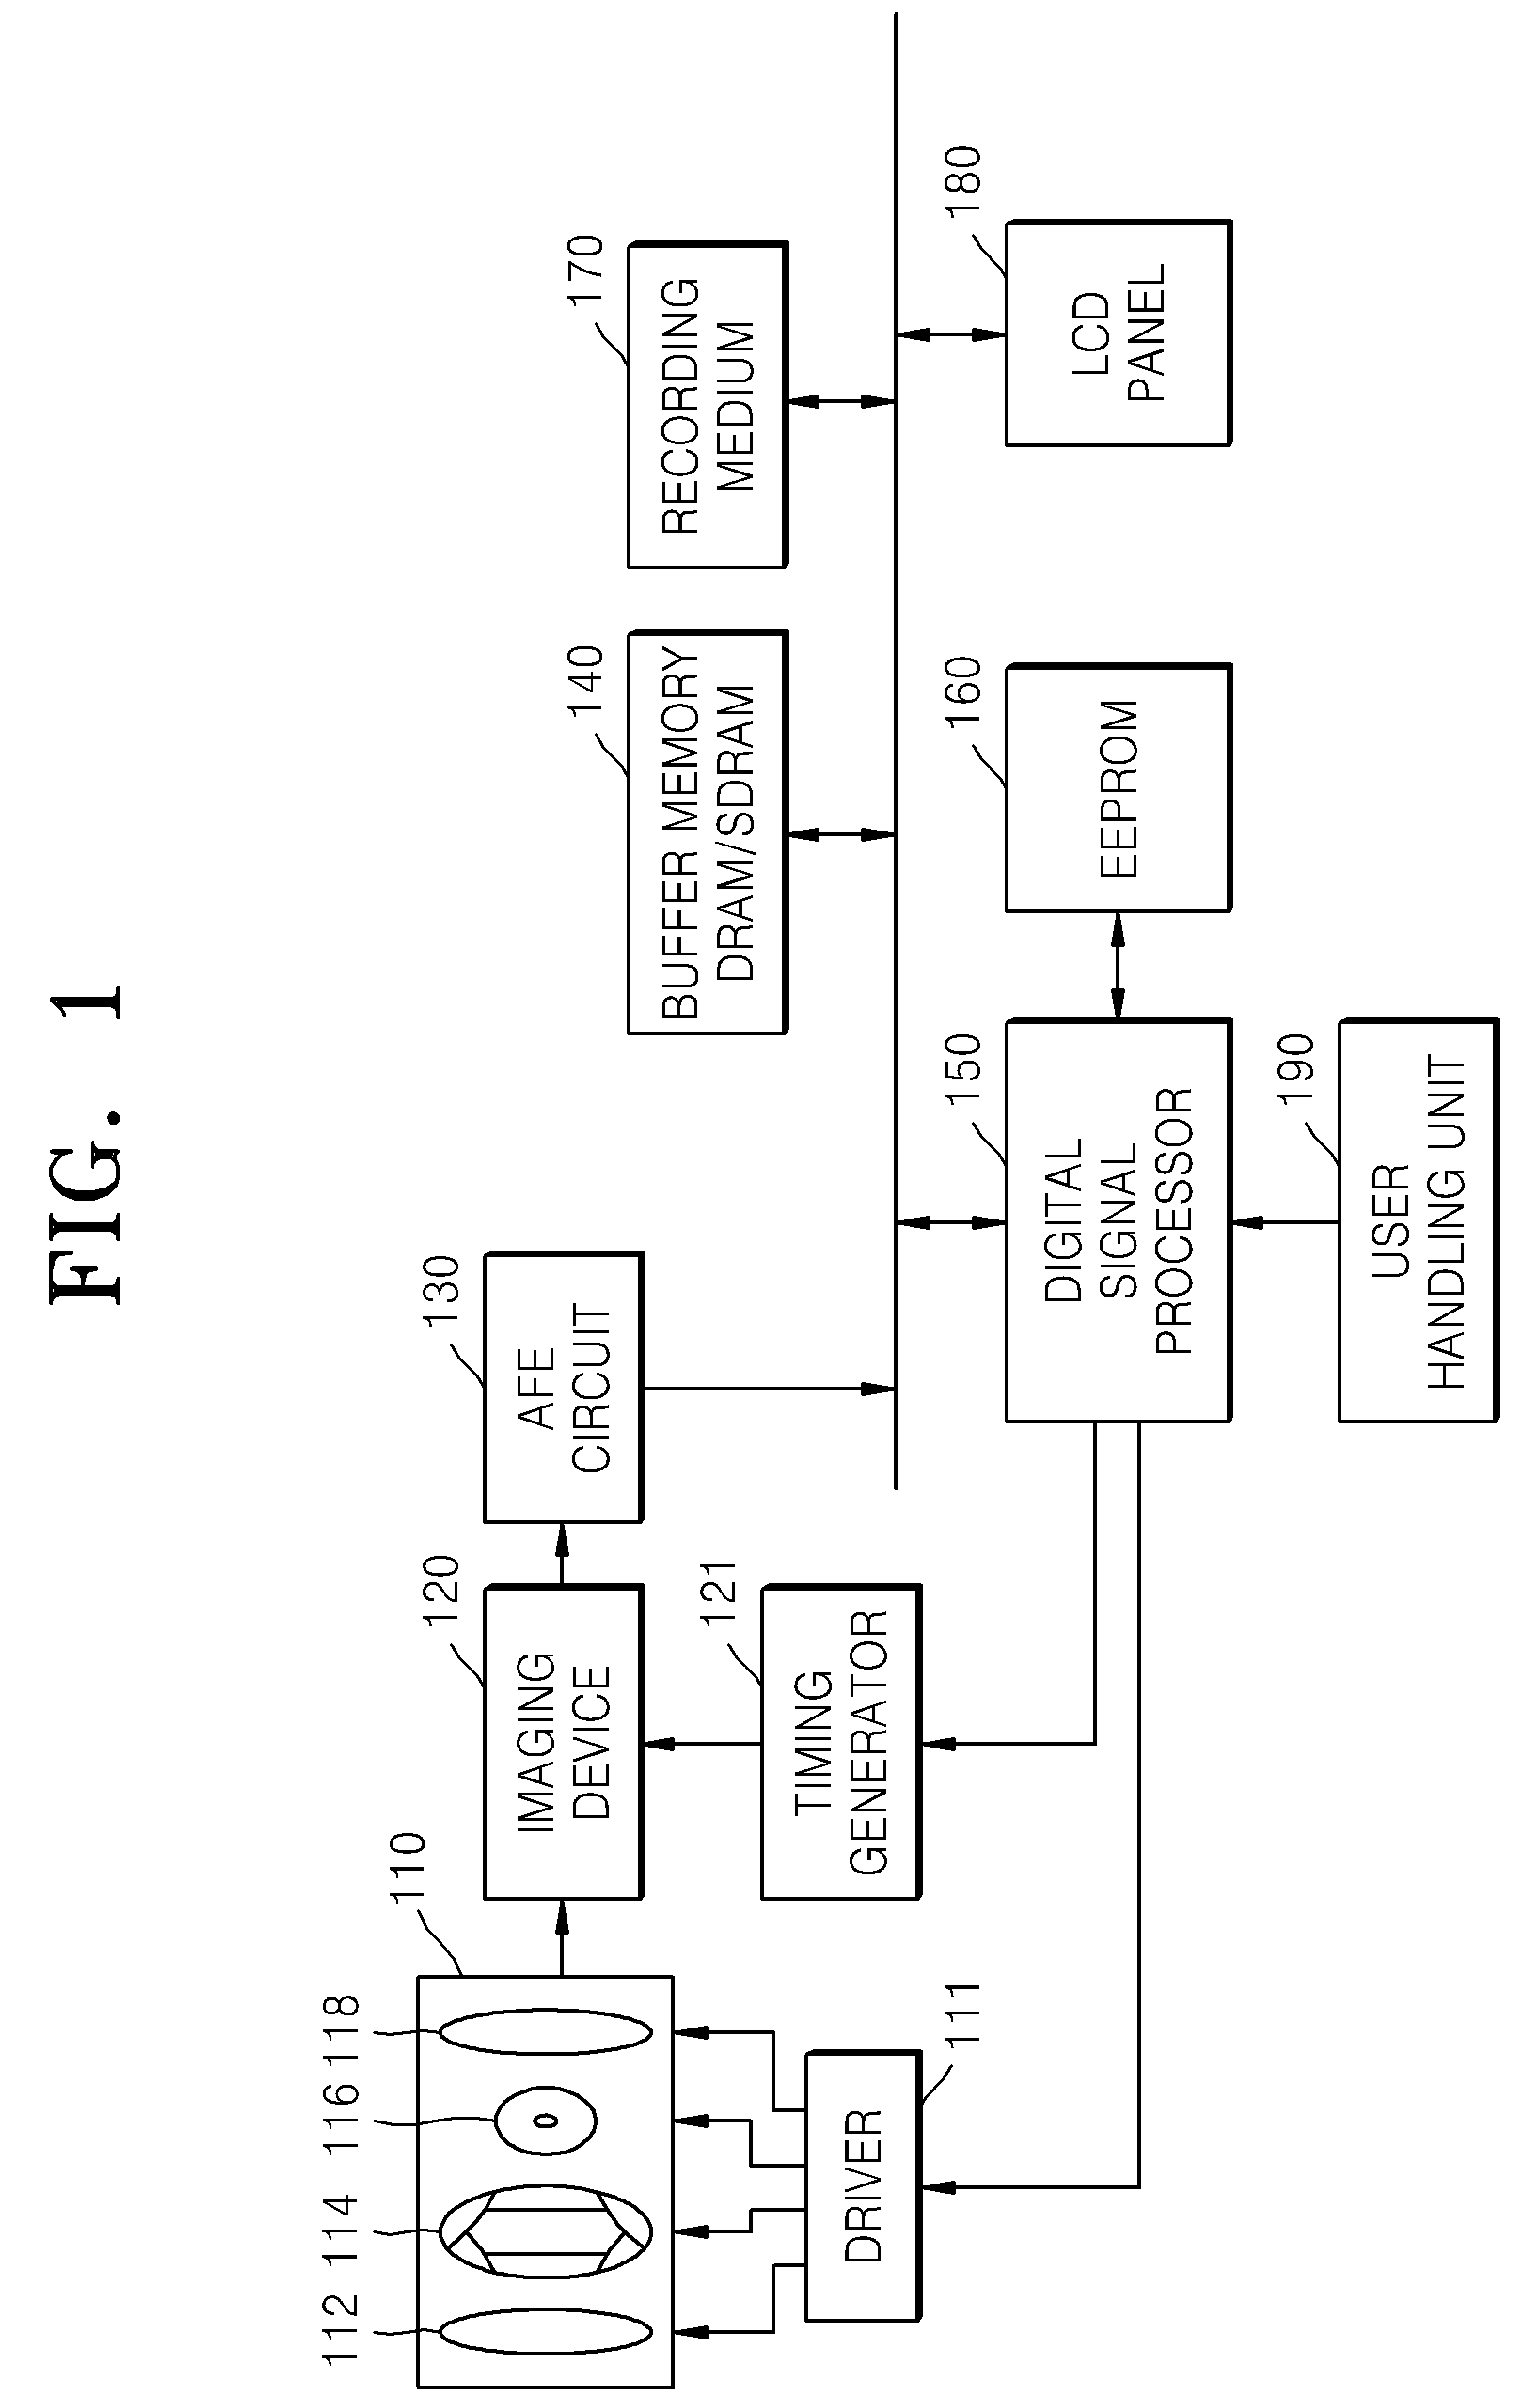 Digital camera having a variable frame rate and method of controlling the digital camera